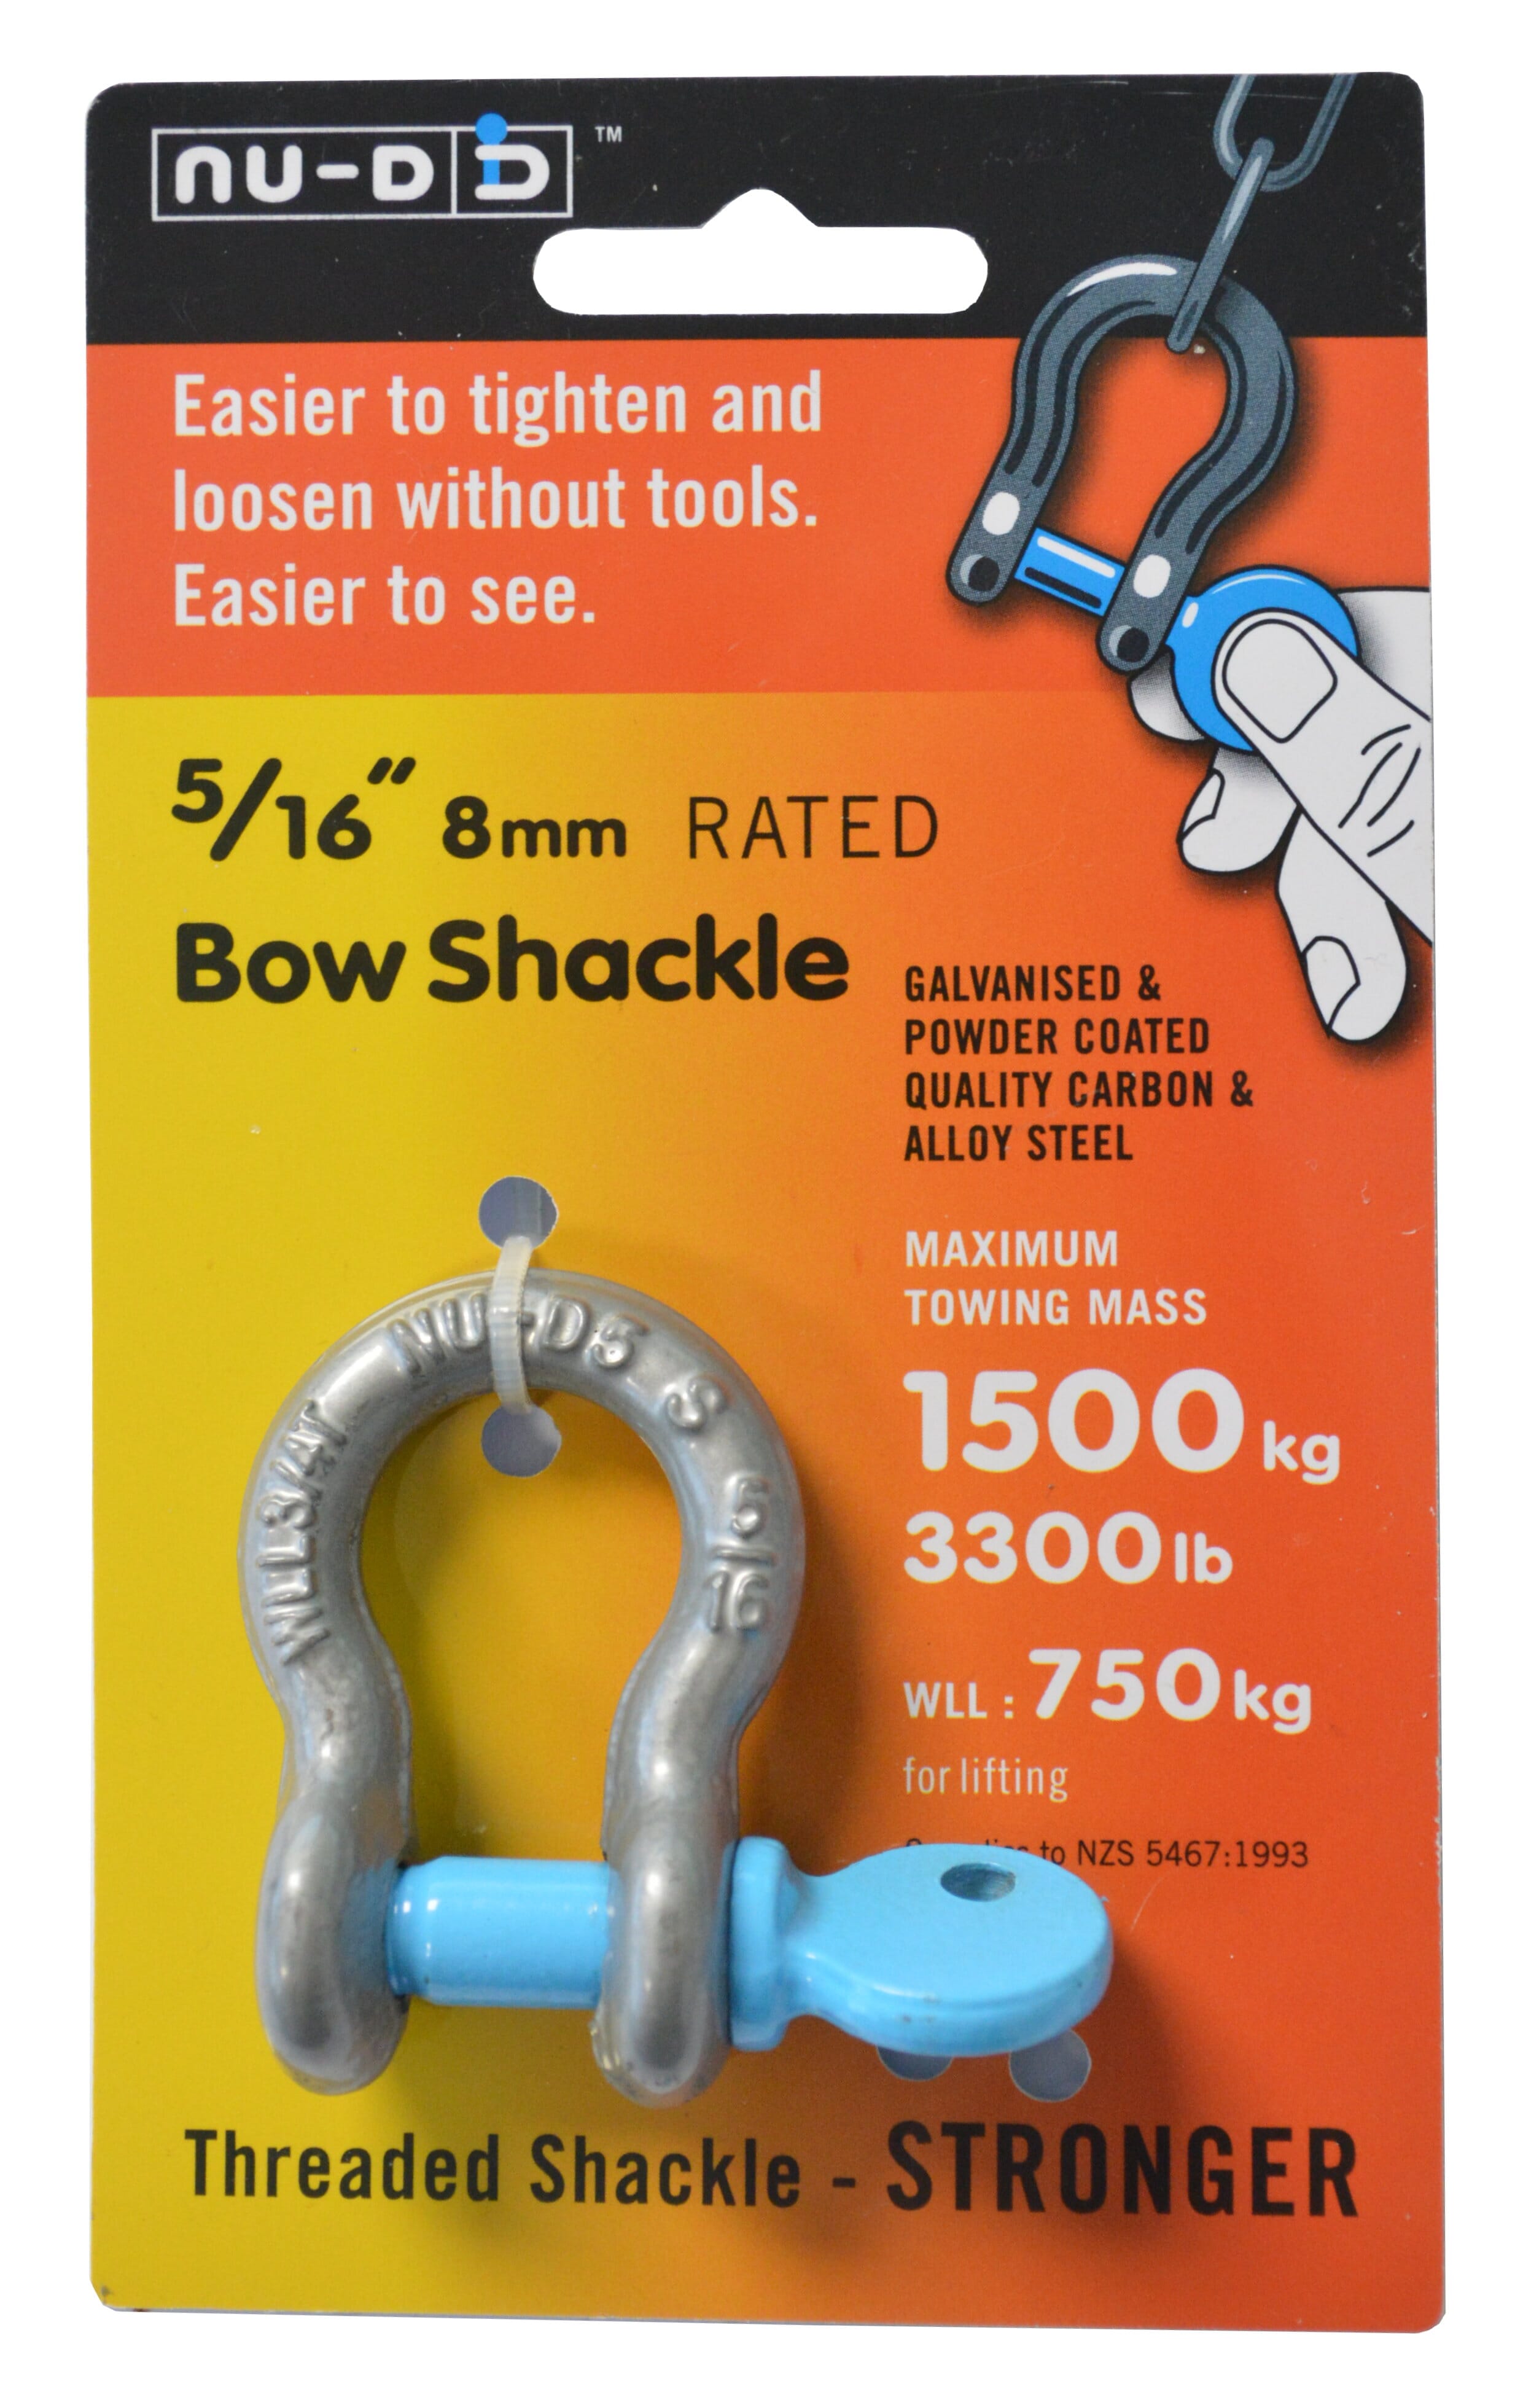 NU-D Bow Shackle Easy Tighten/Loosen Galvanised Tested  WLL 750Kg 8mm